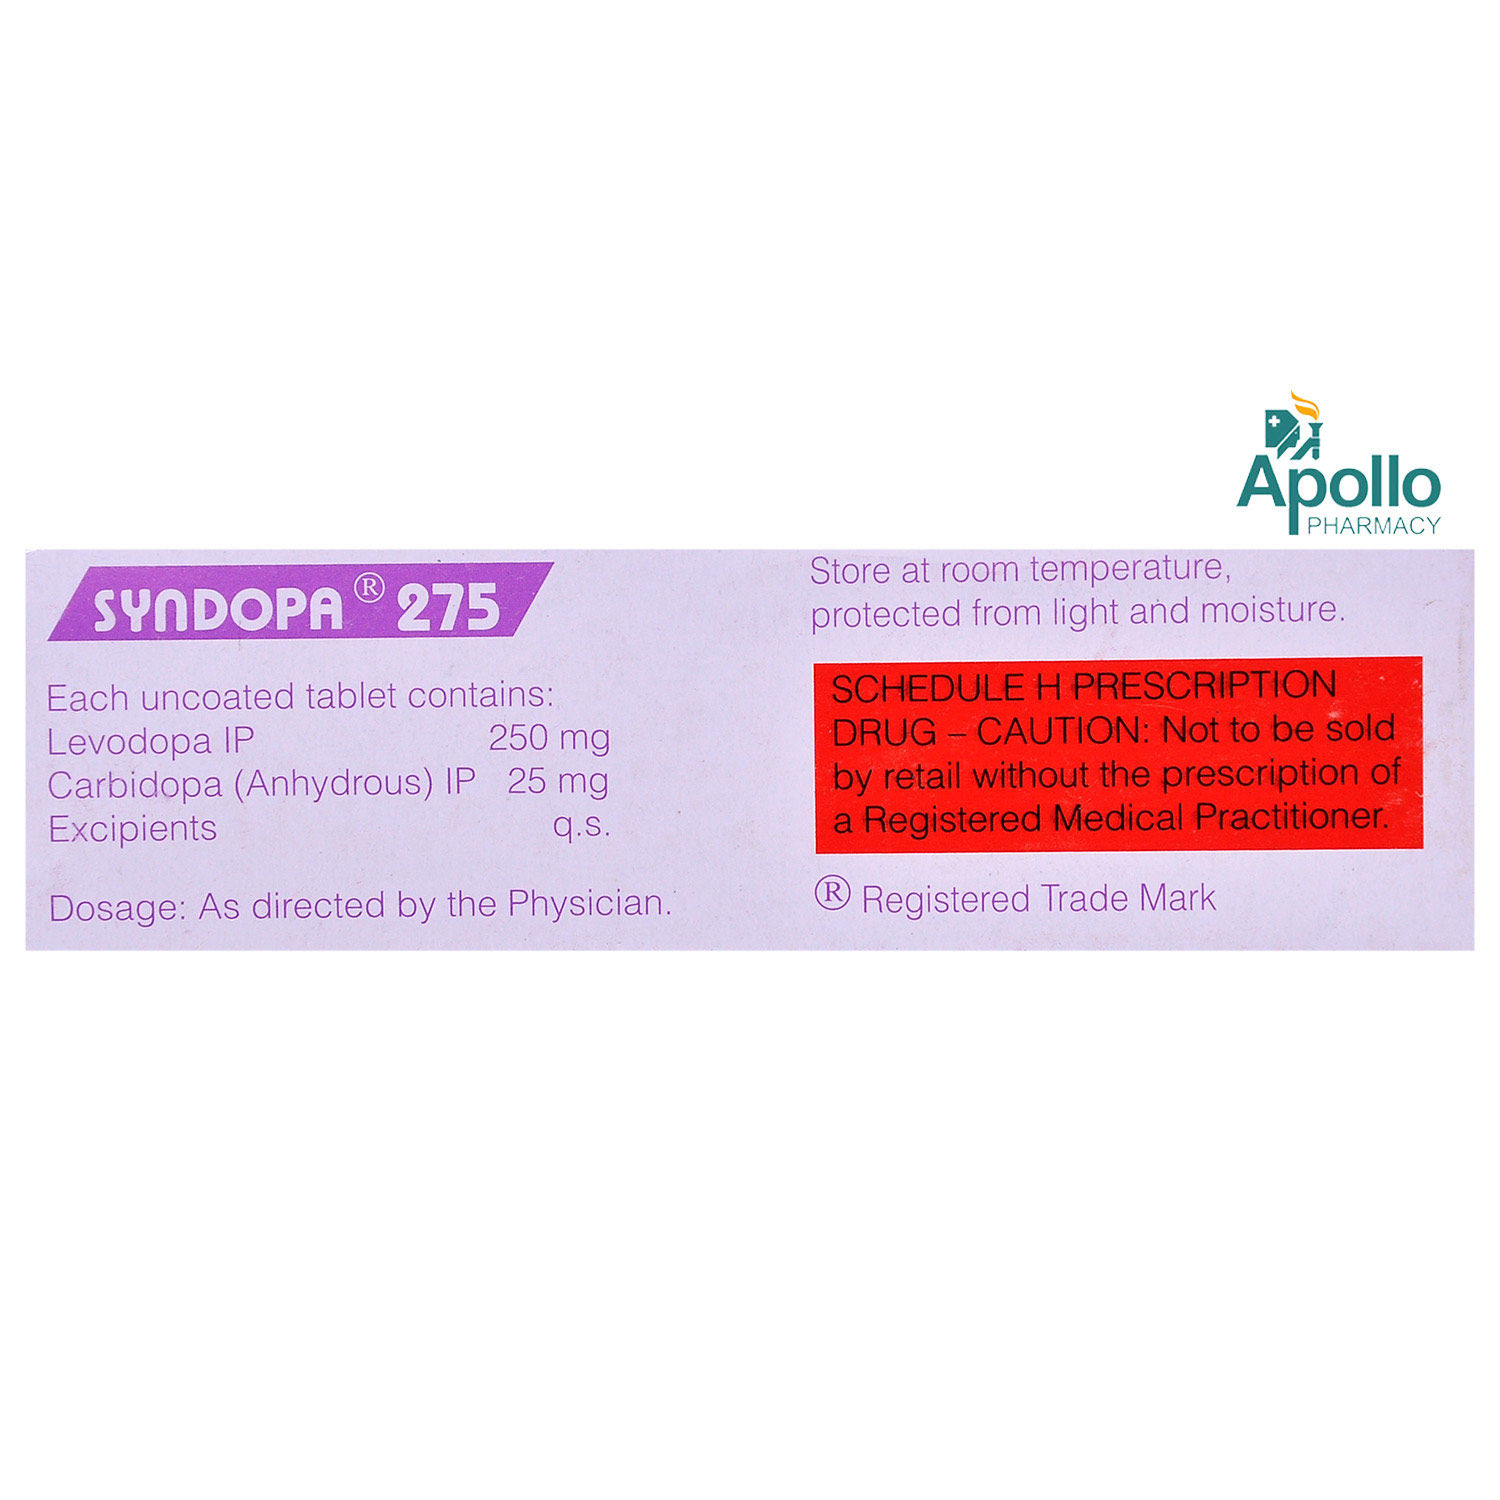 SYNDOPA 275MG TABLET, Pack of 10 TABLETS